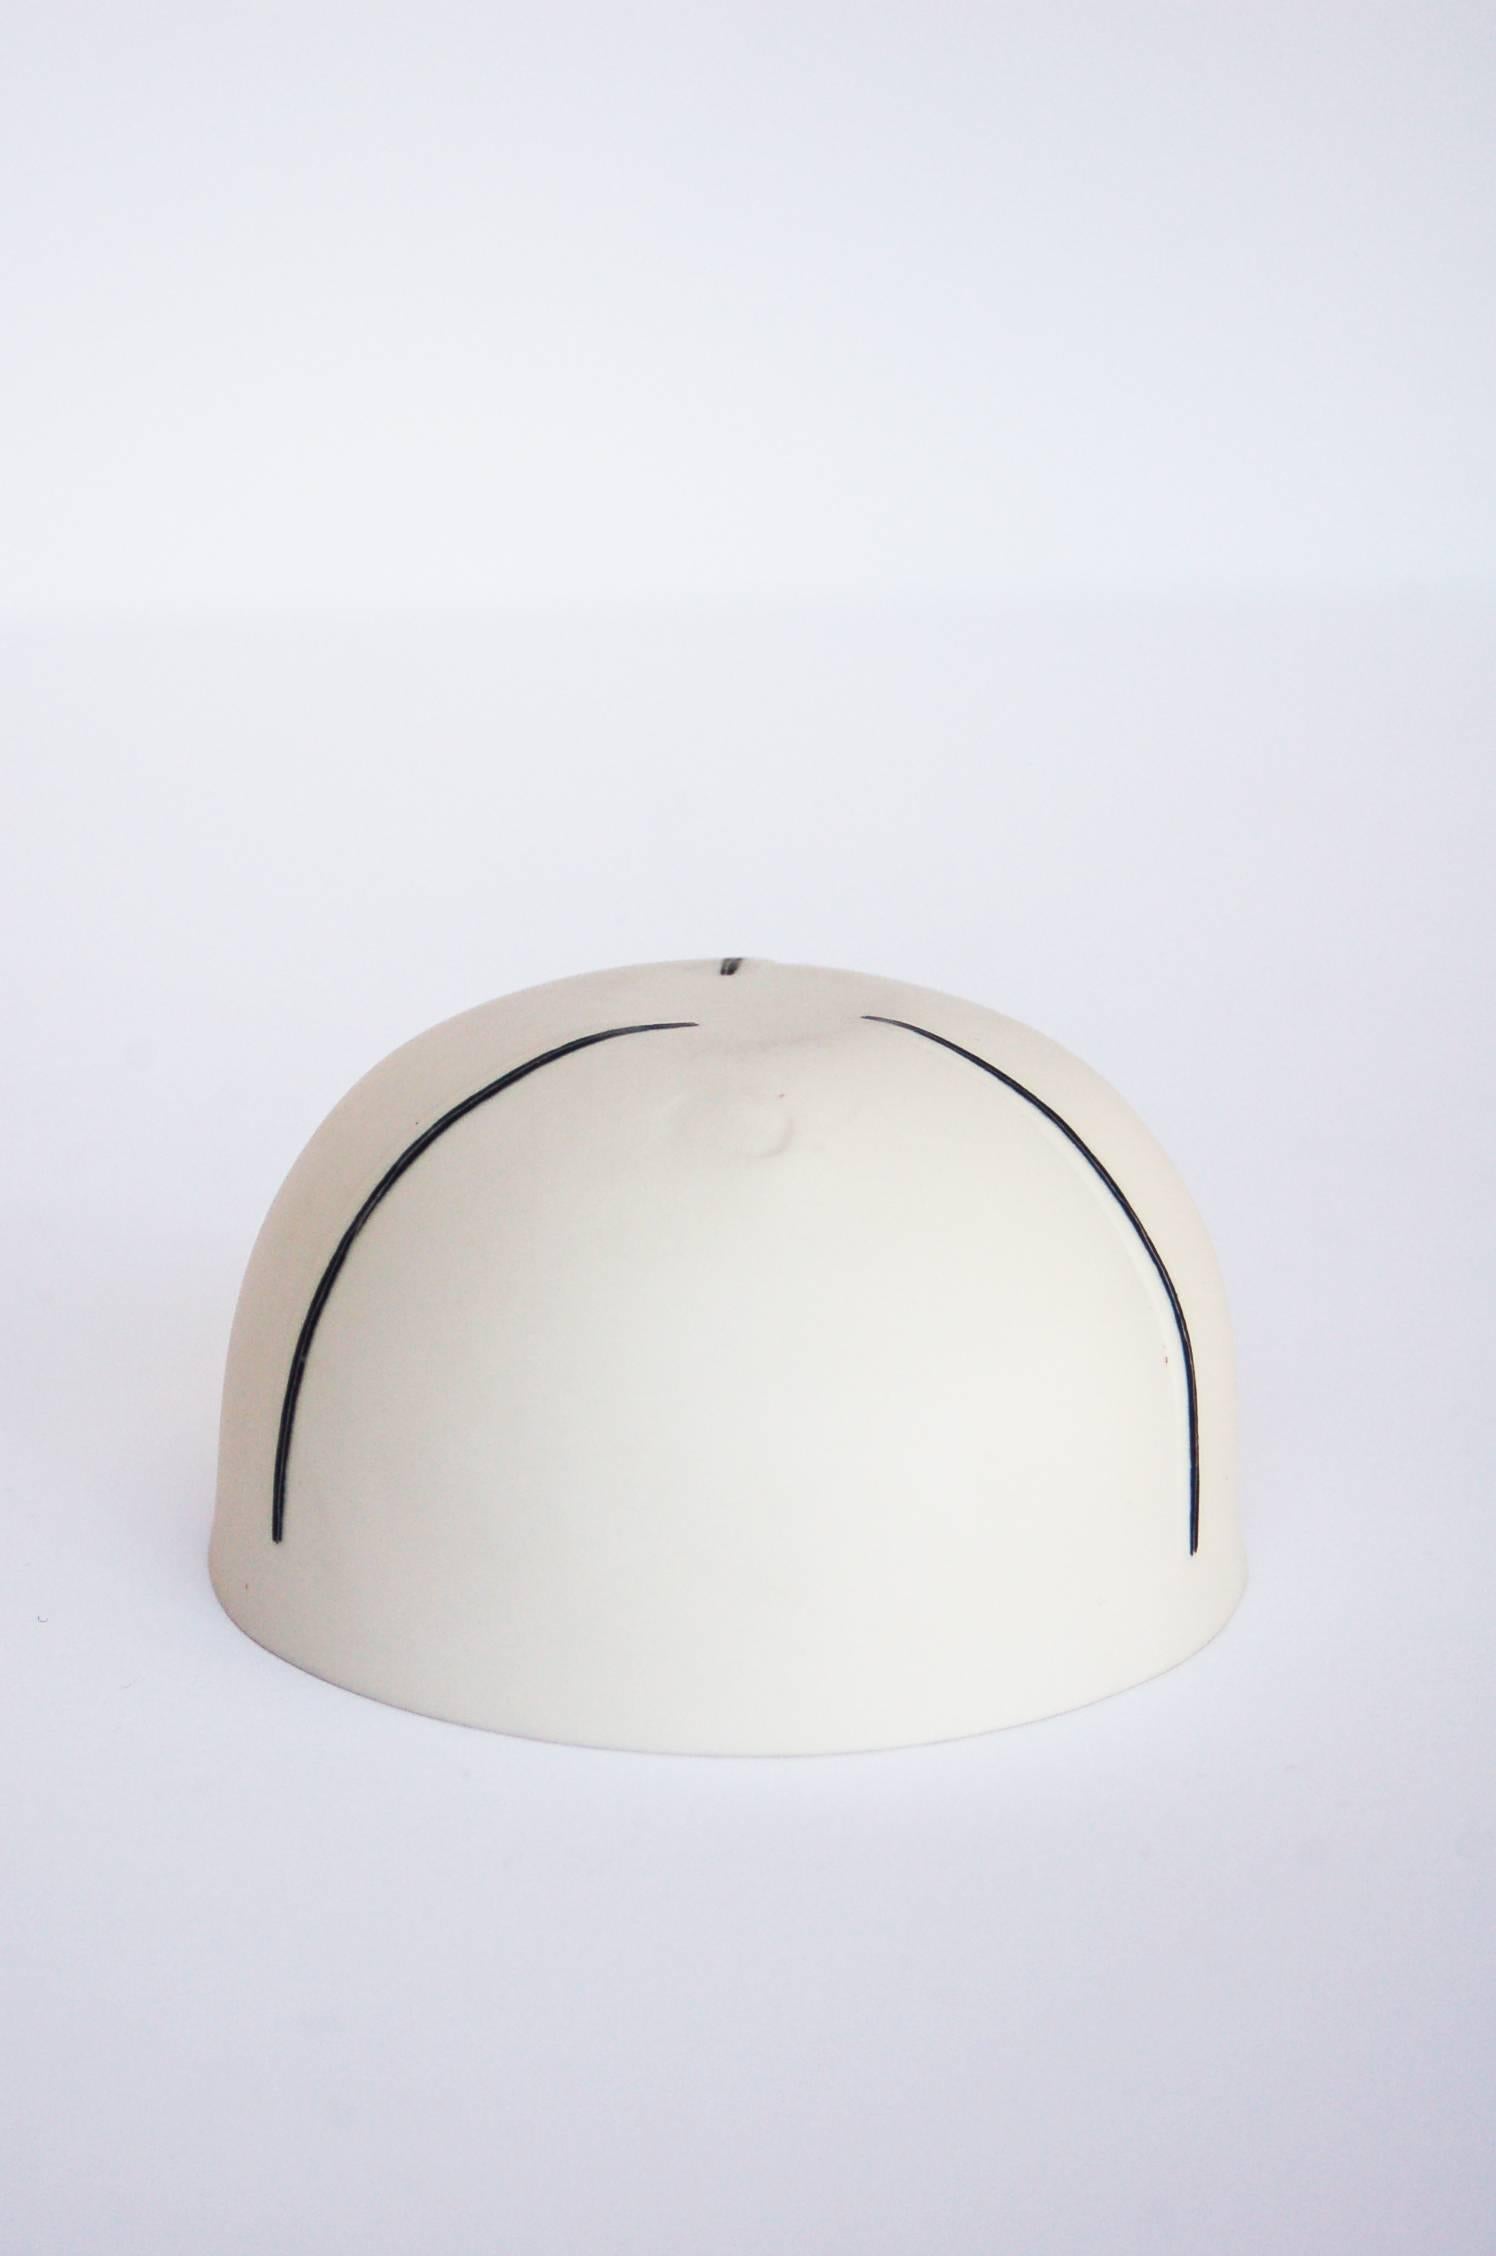 Contemporary Black and White Porcelain Bowl by Carman Ballarin For Sale